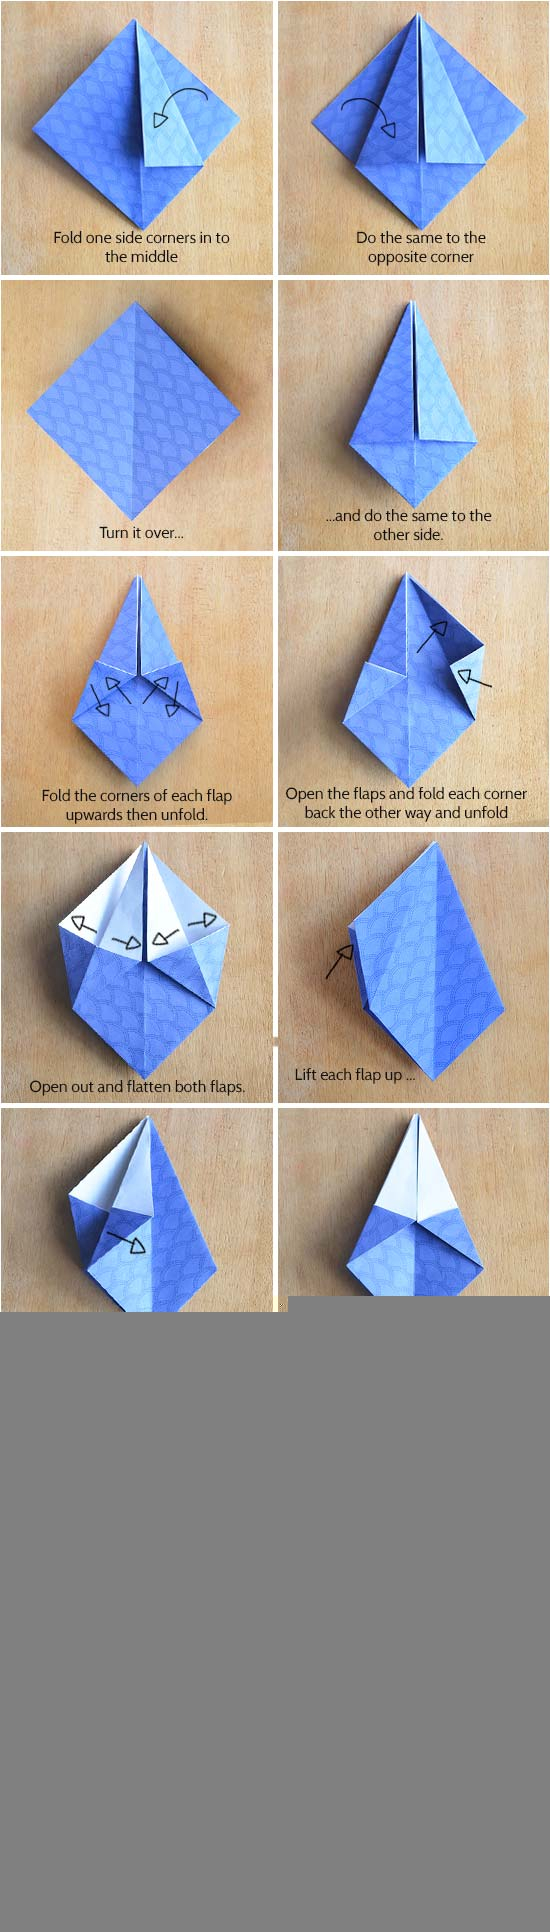 How To Make A Origami Paper Box Origami Star Boxes With Printable Origami Paper Picklebums